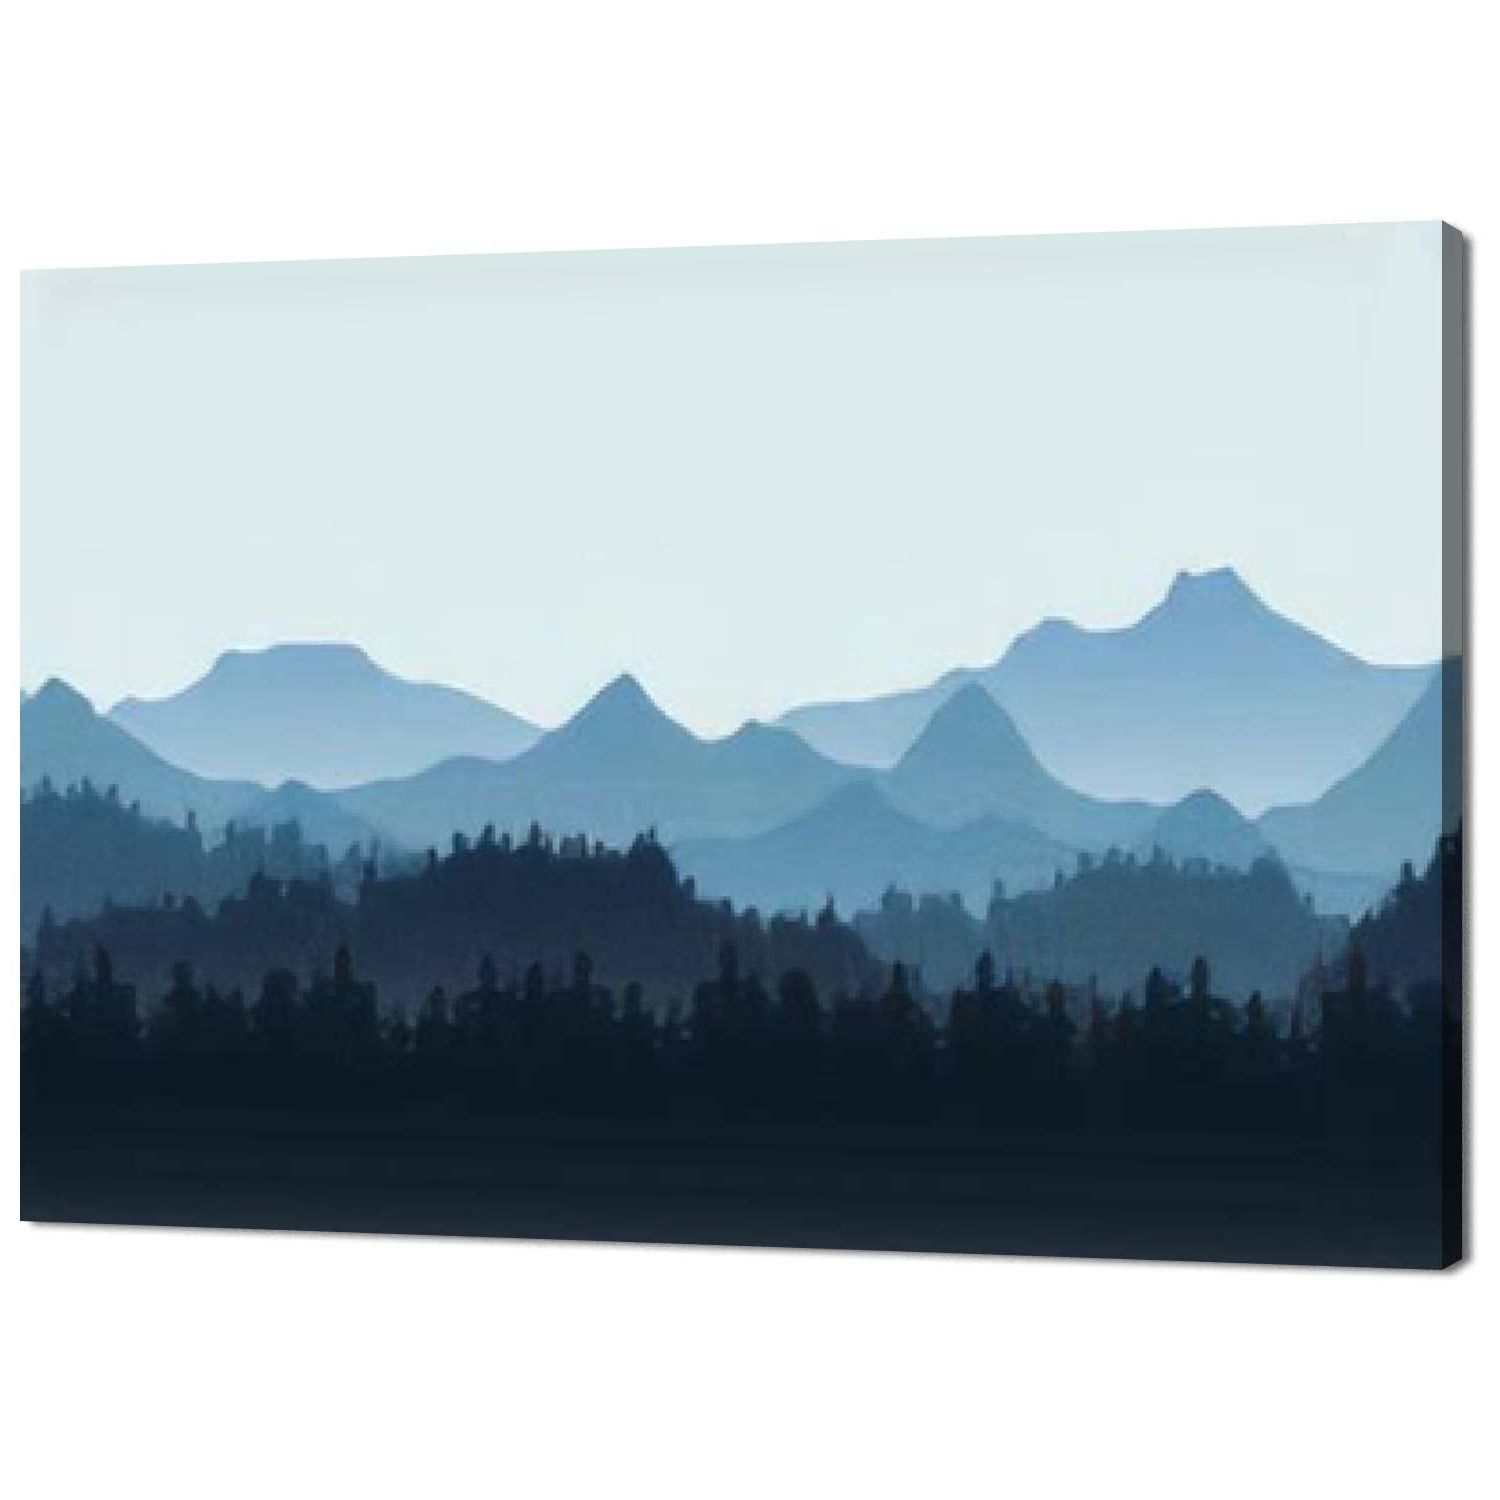 Most Current Amazon: Canvas Wall Art Prints Realistic Of Mountain Landscape With  Hills And Coniferous Forest Under Paintings Poster Artwork Home Decor Ready  To Hang For Living Room Bedroom Dining Room 20 X 30 For Mountains And Hills Wall Art (View 10 of 15)